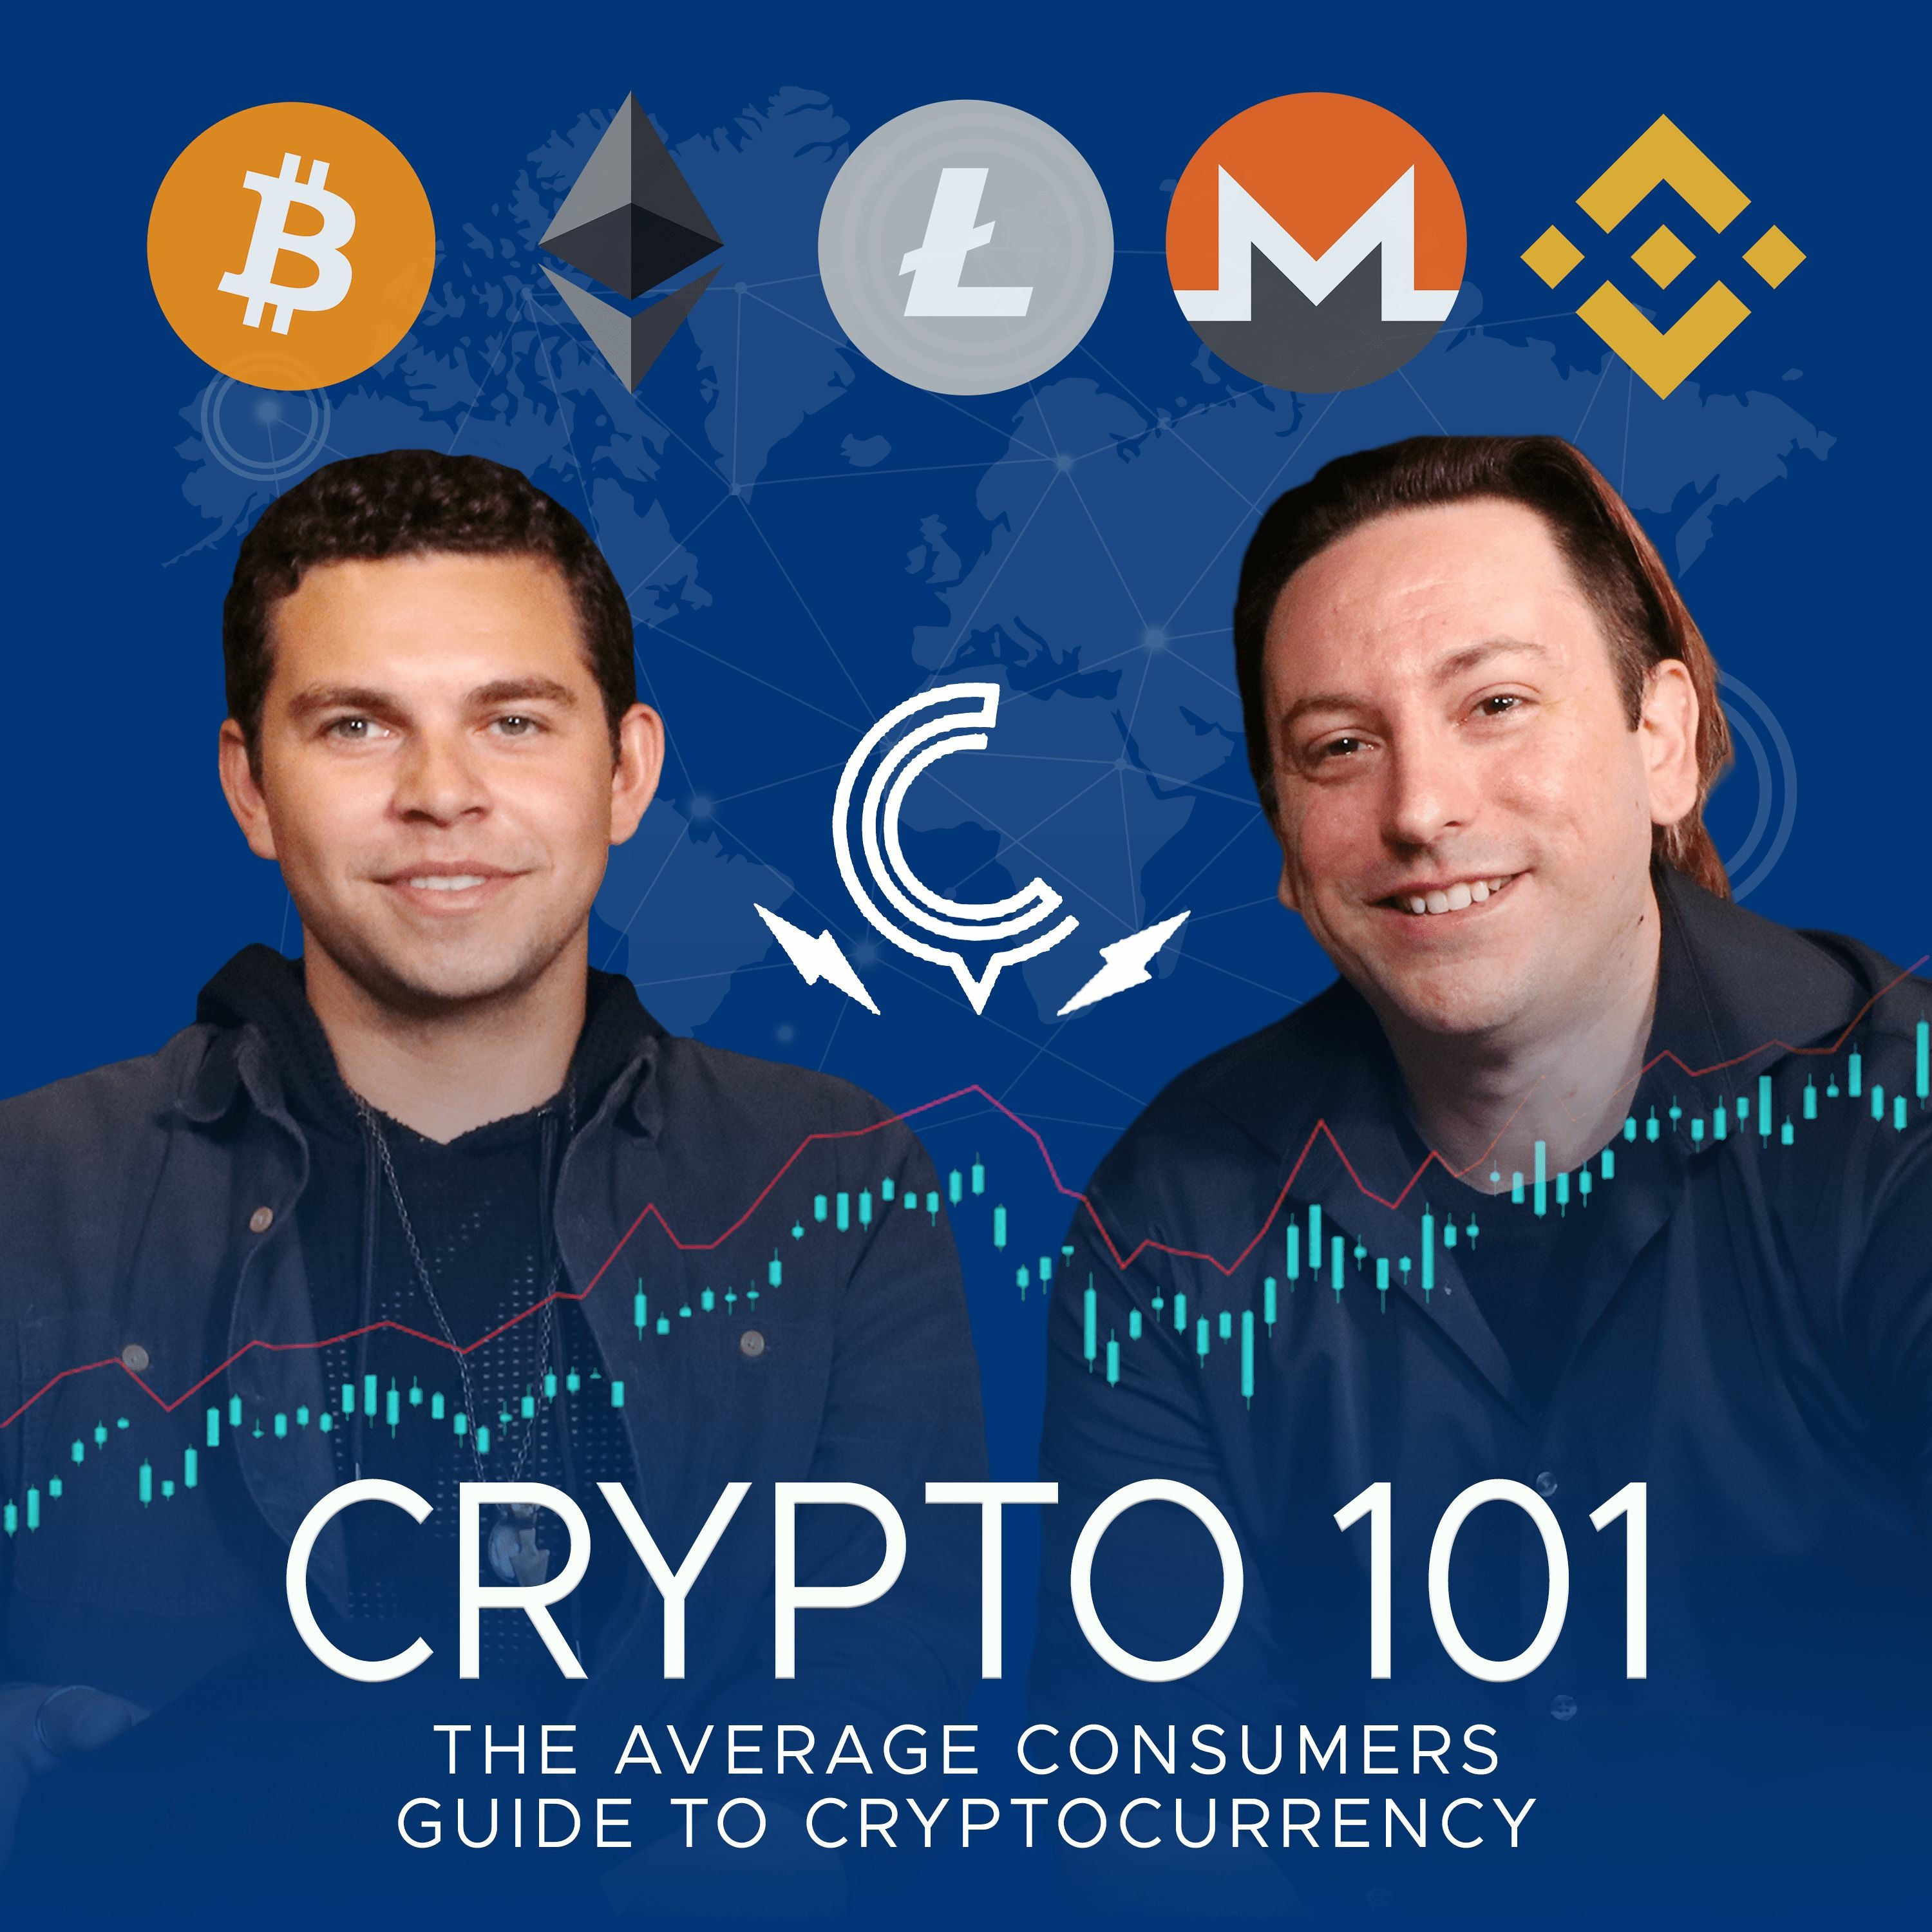 Ep. 278 - Blockchain and Crypto's Endless Possibilities, w/ Abstrakt CEO Corey Segall